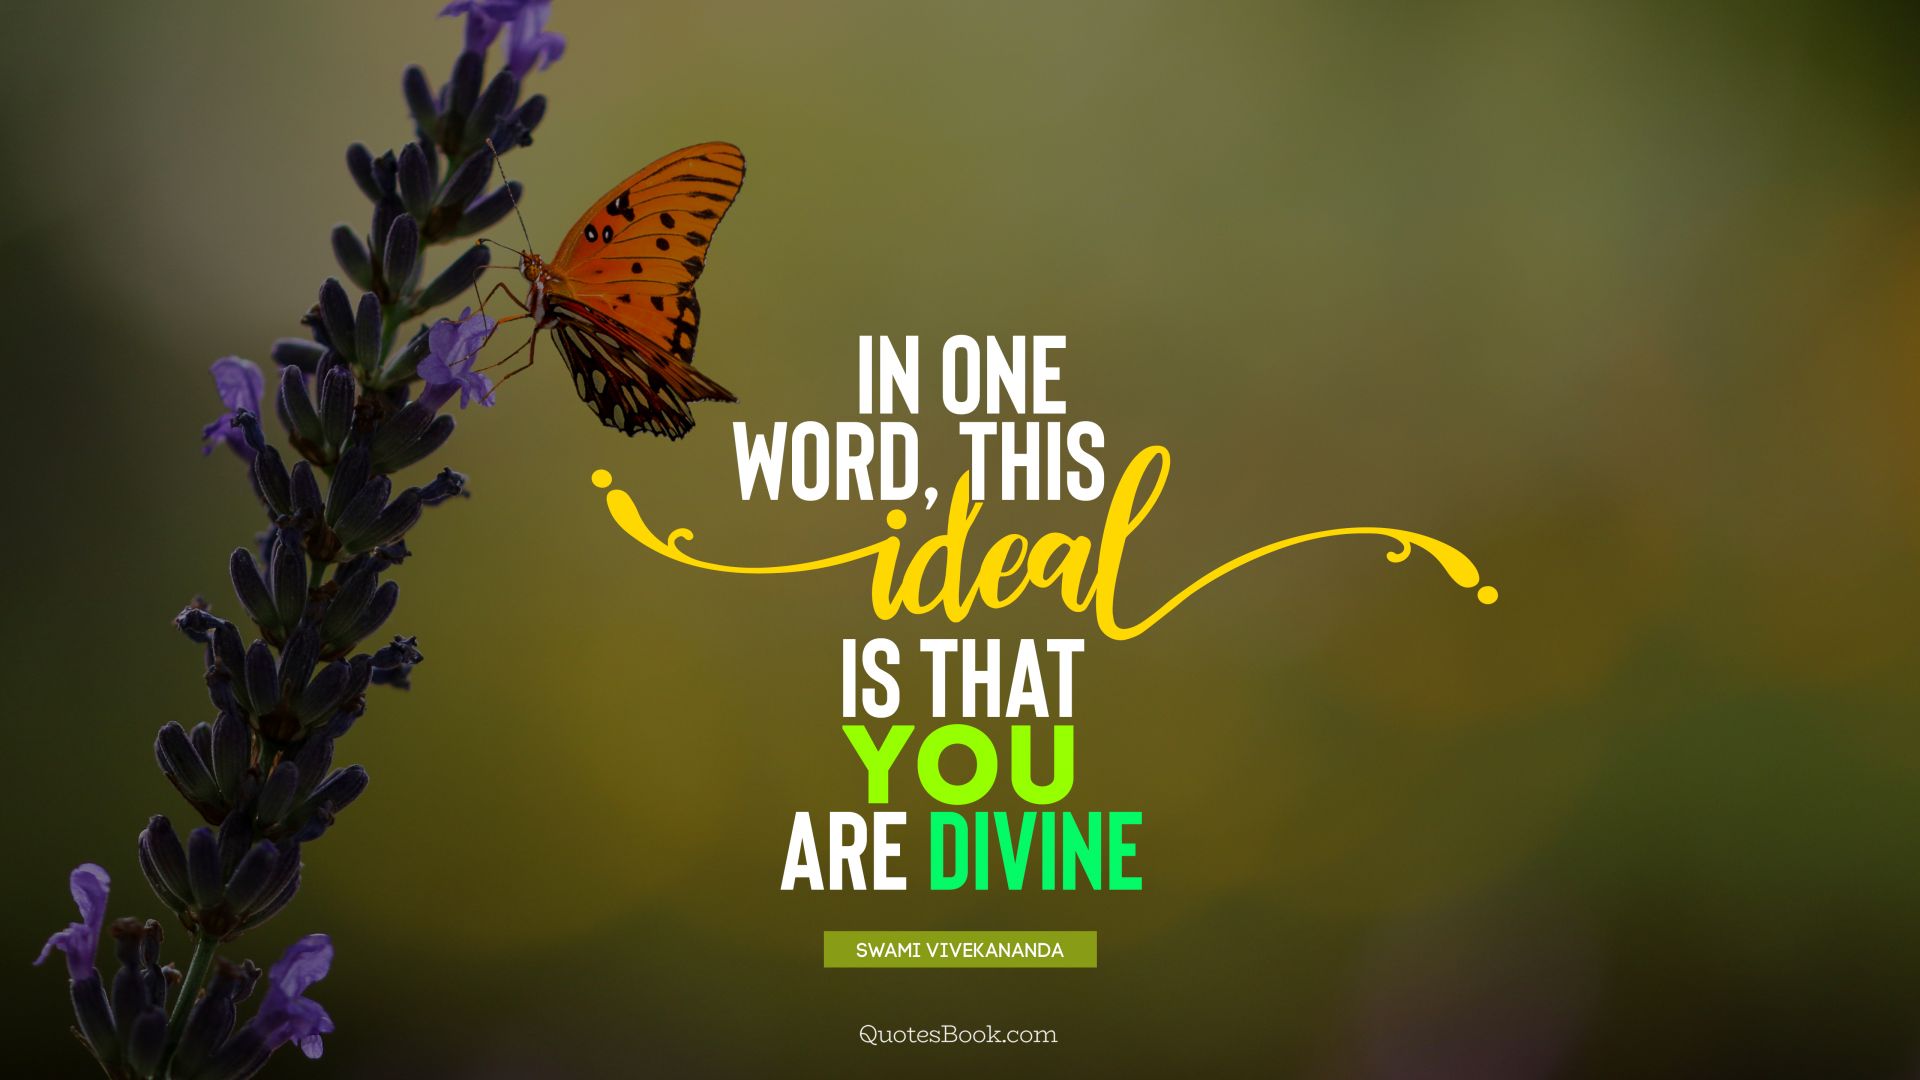 In one word, this ideal is that you are divine. - Quote by Swami Vivekananda